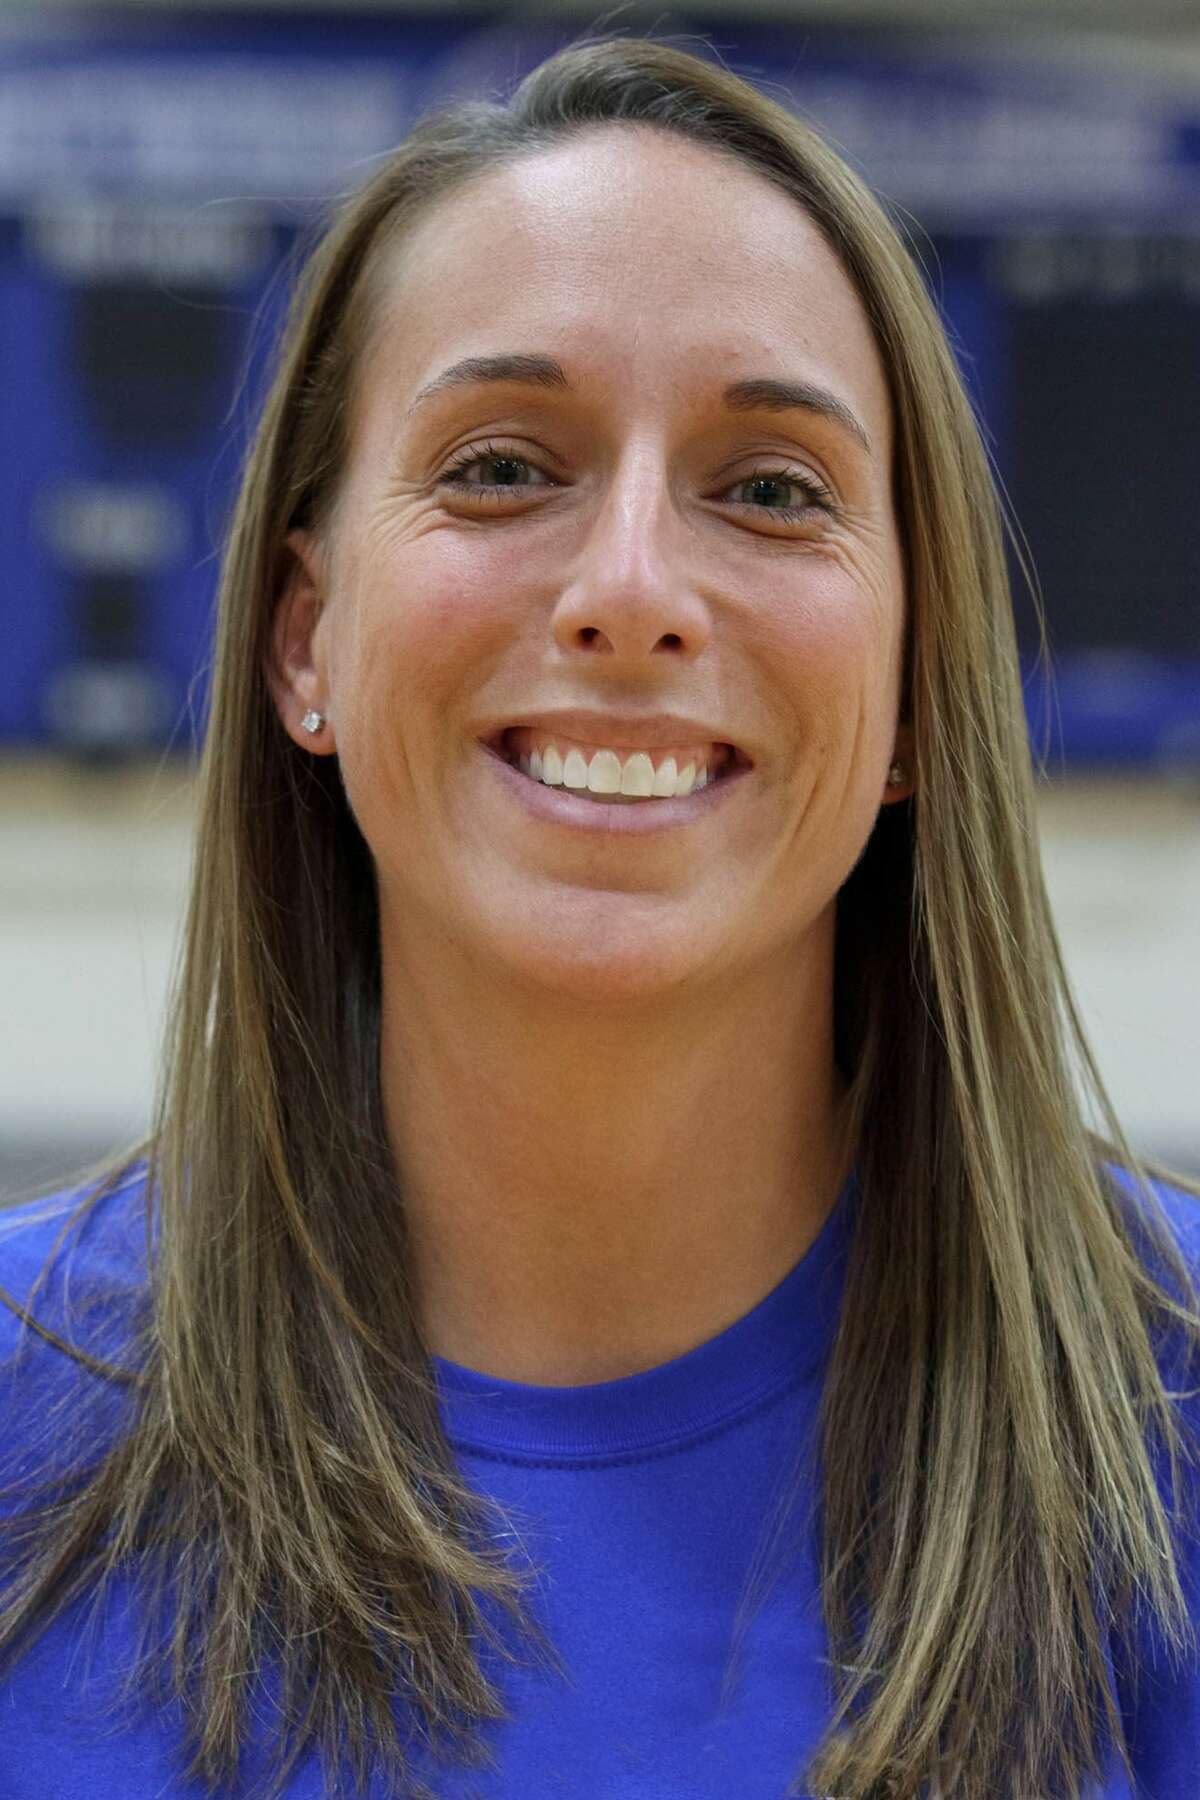 Guilderland High School graduate Katie Marcella returns to the Capital Region as Union College's new women's basketball coach after six years at Hartwick.